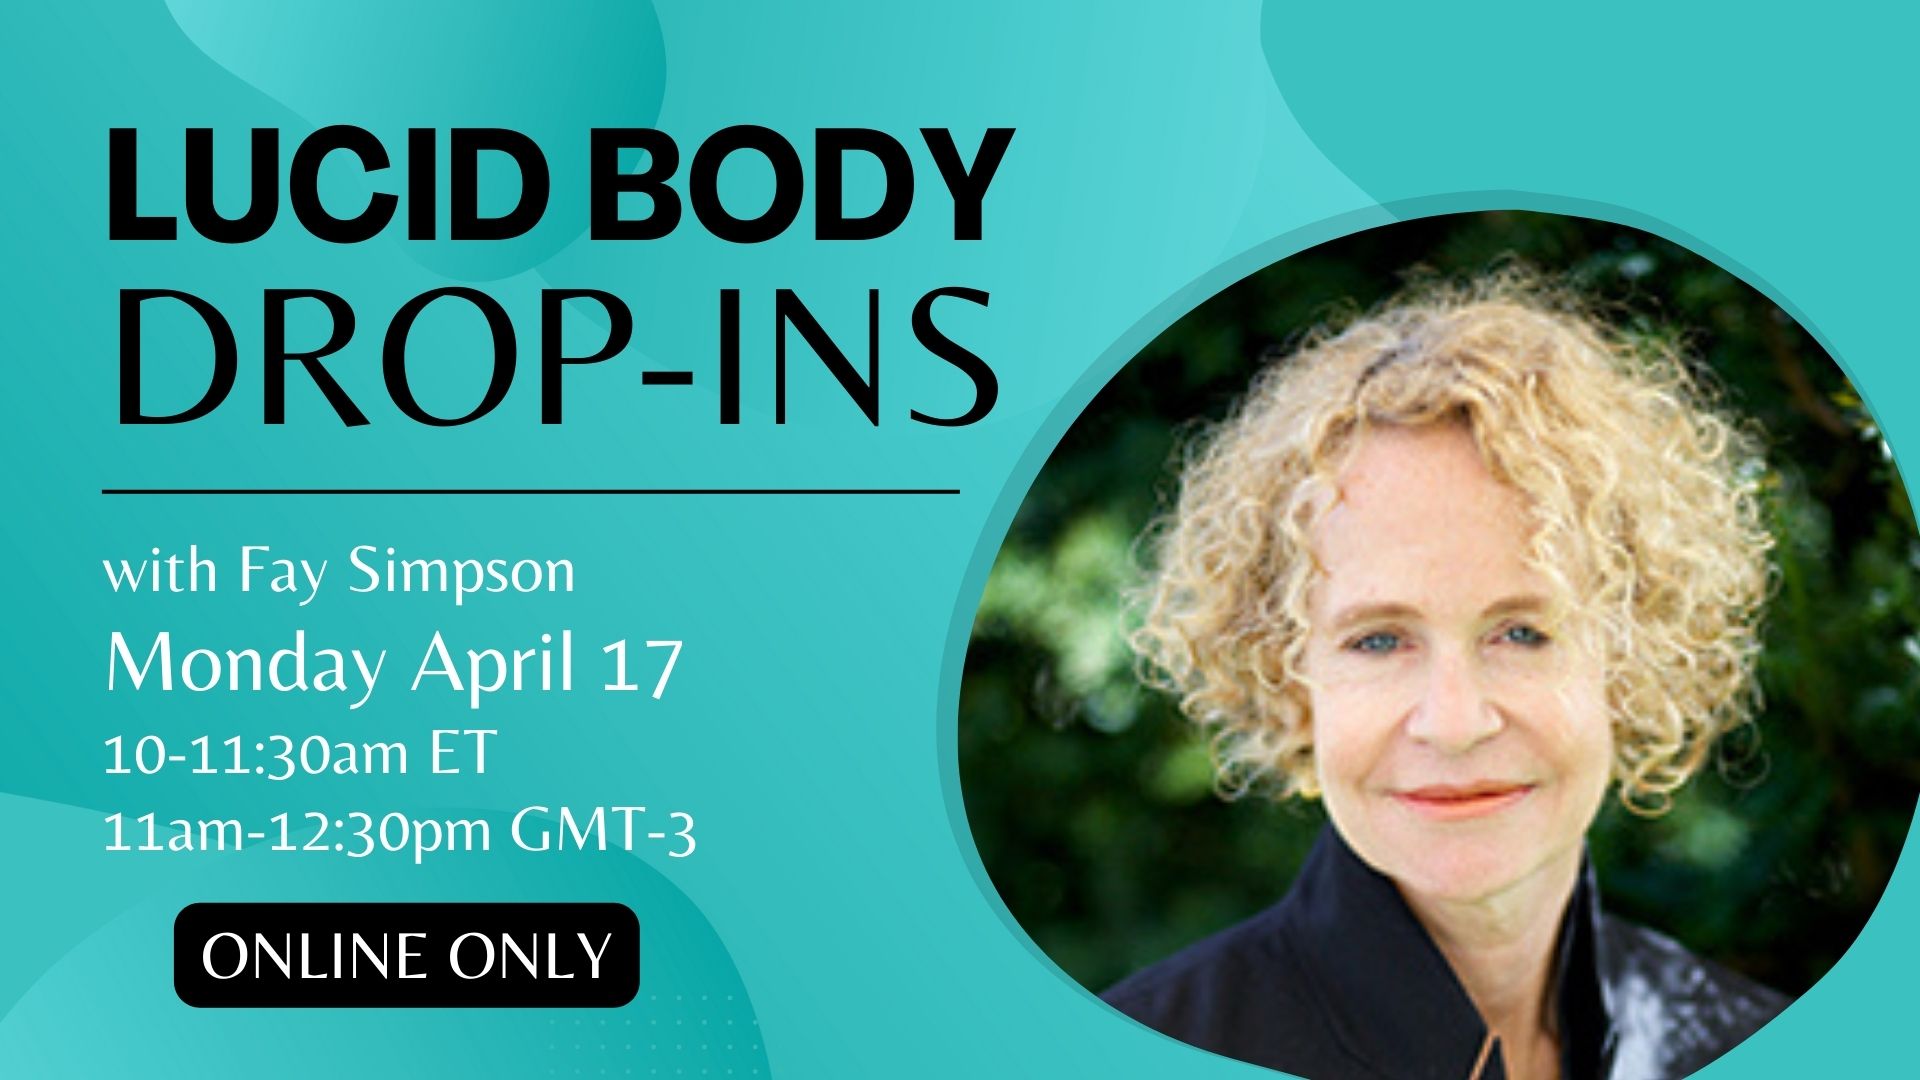 Lucid Body Drop-in April 17 with Fay Simpson online via Zoom